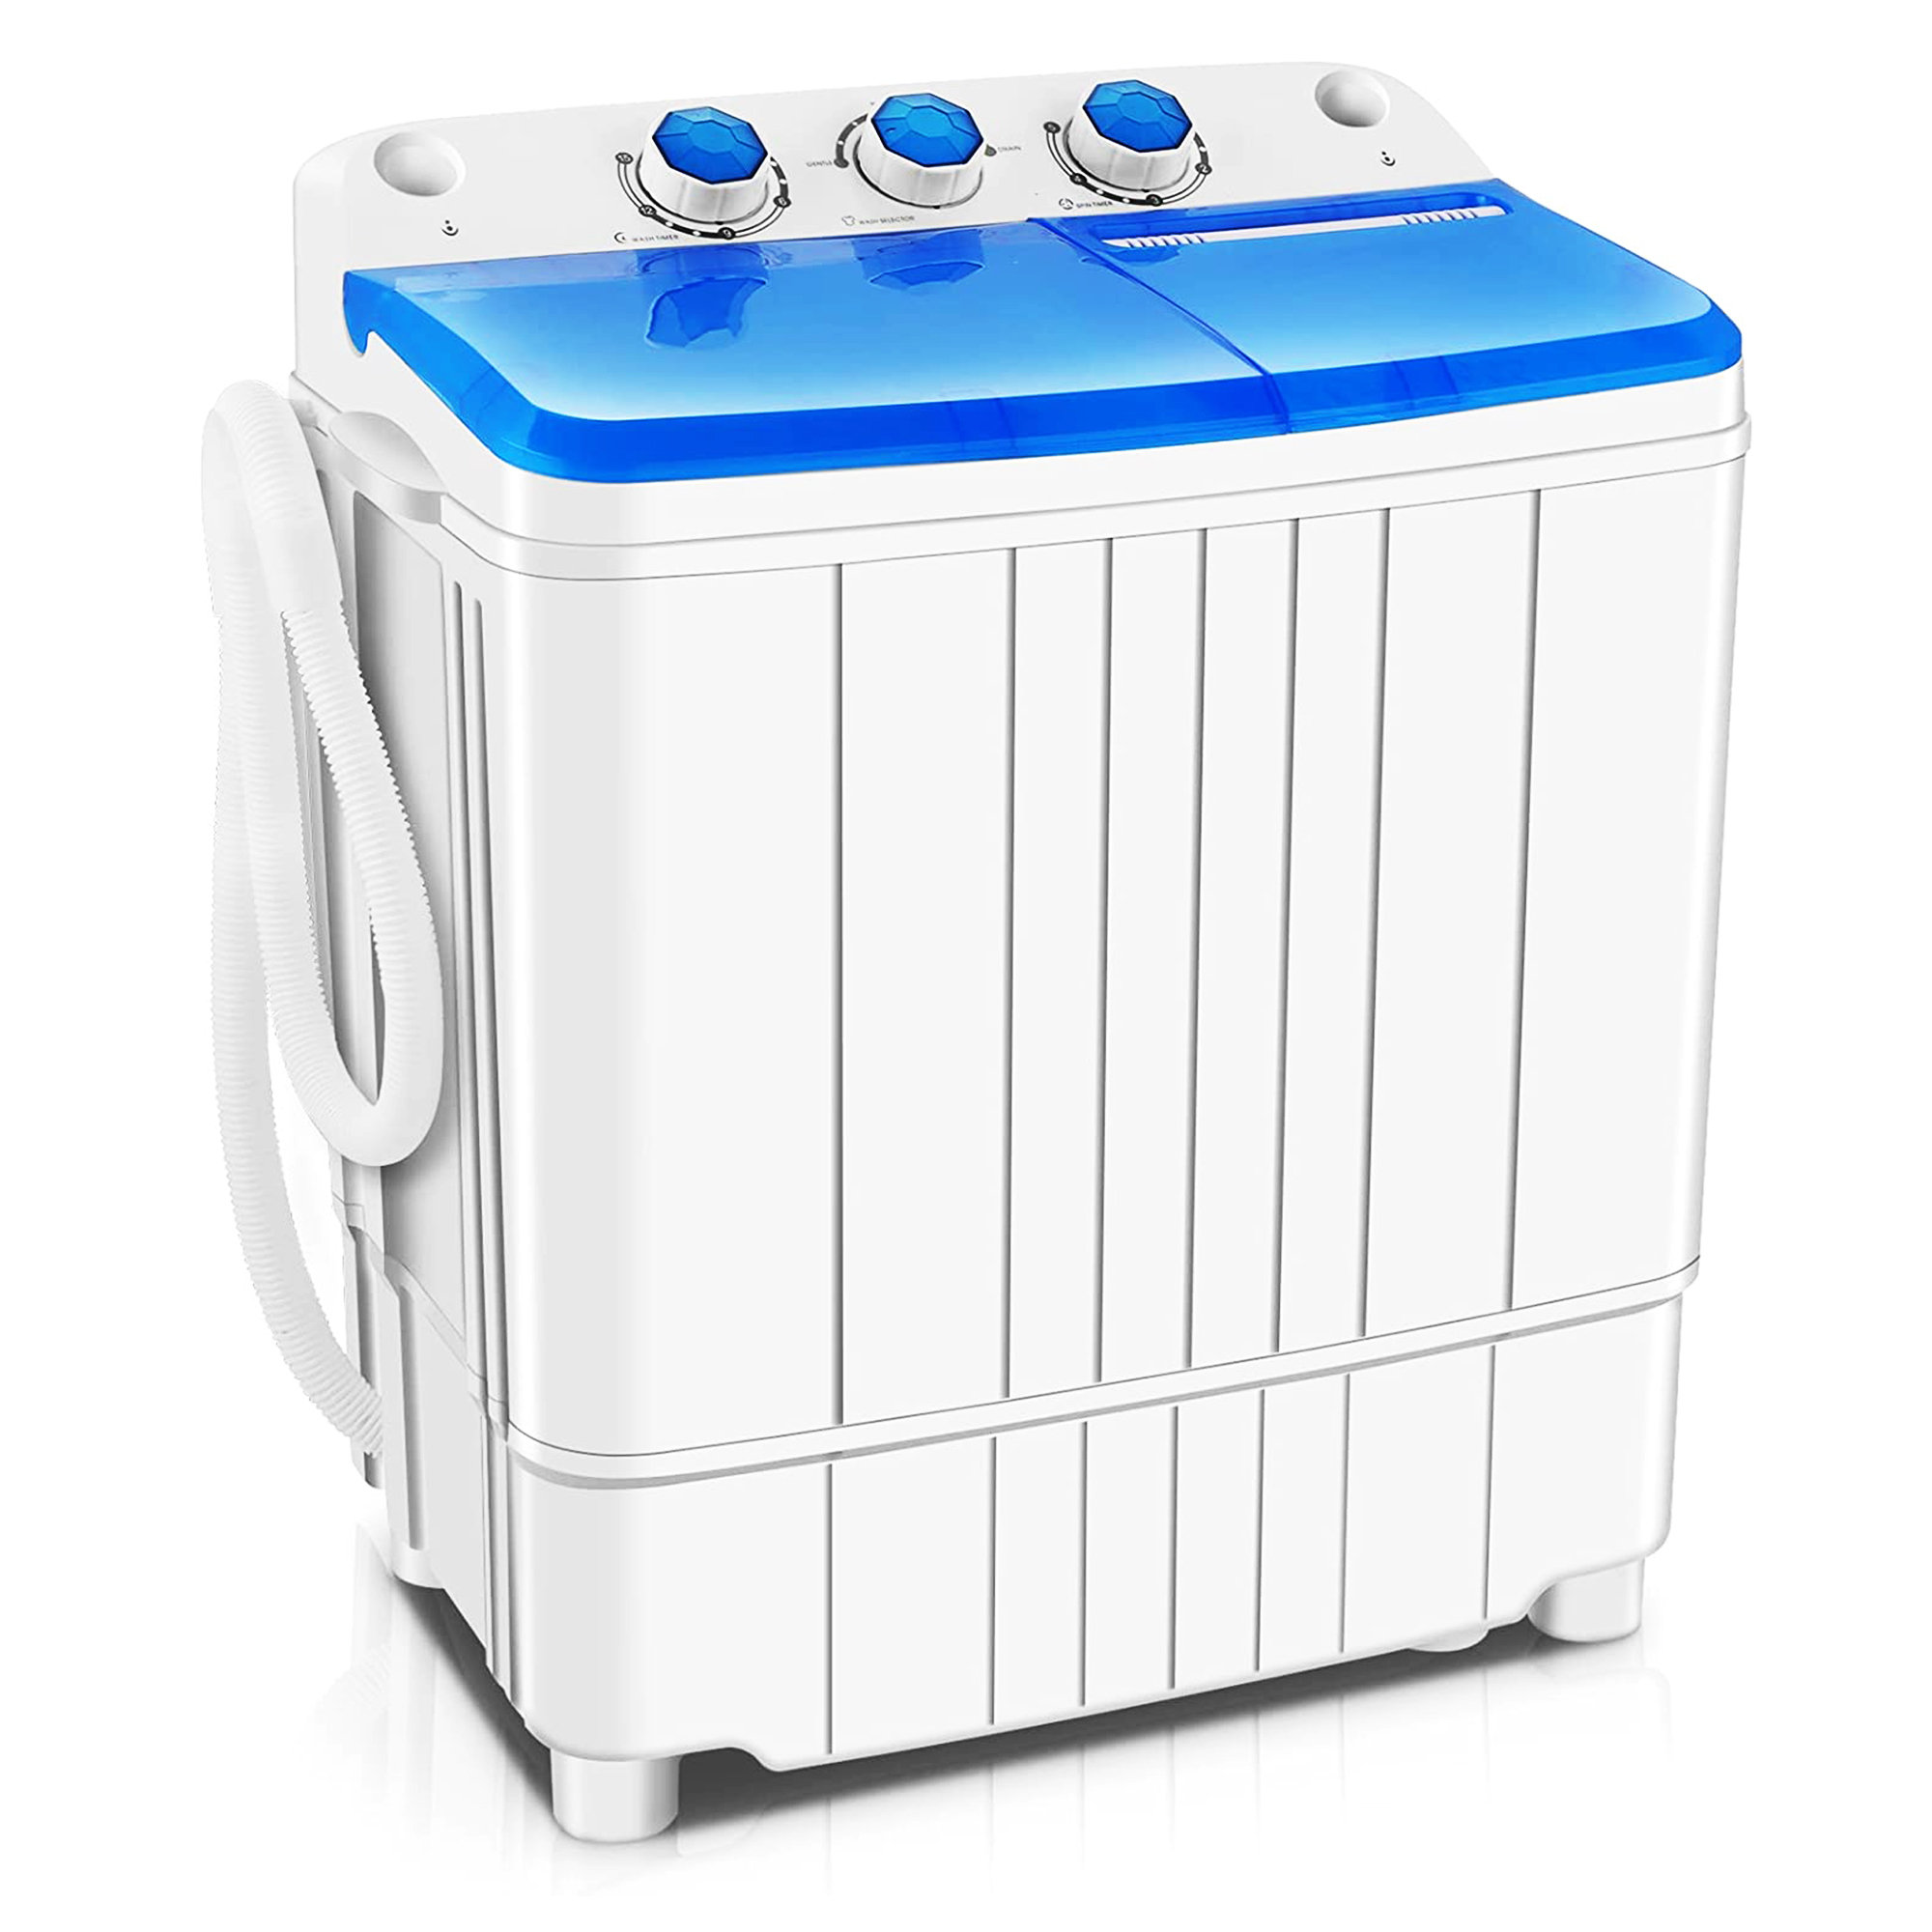 Costway High Efficiency Portable Washer & Dryer Combo in White